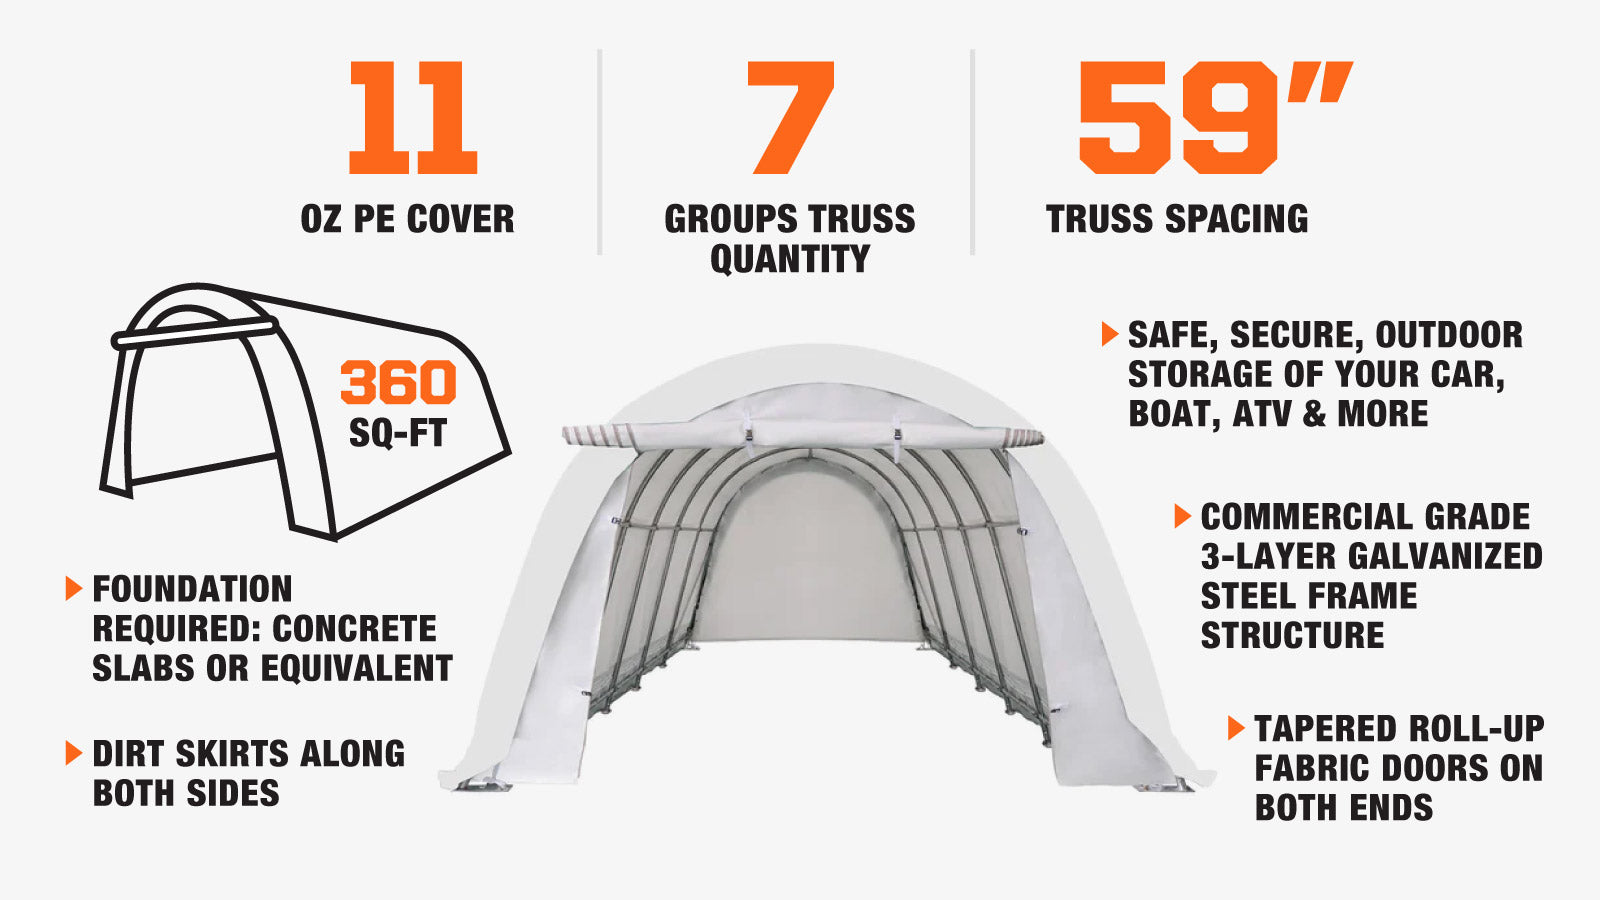 TMG Industrial 12’ x 30’ Car Shelter w/Rounded Roof & Heavy-Duty 11 OZ PE Fabric Cover, Galvanized Steel Frame, Roll-Up Doors, TMG-ST1230R-description-image